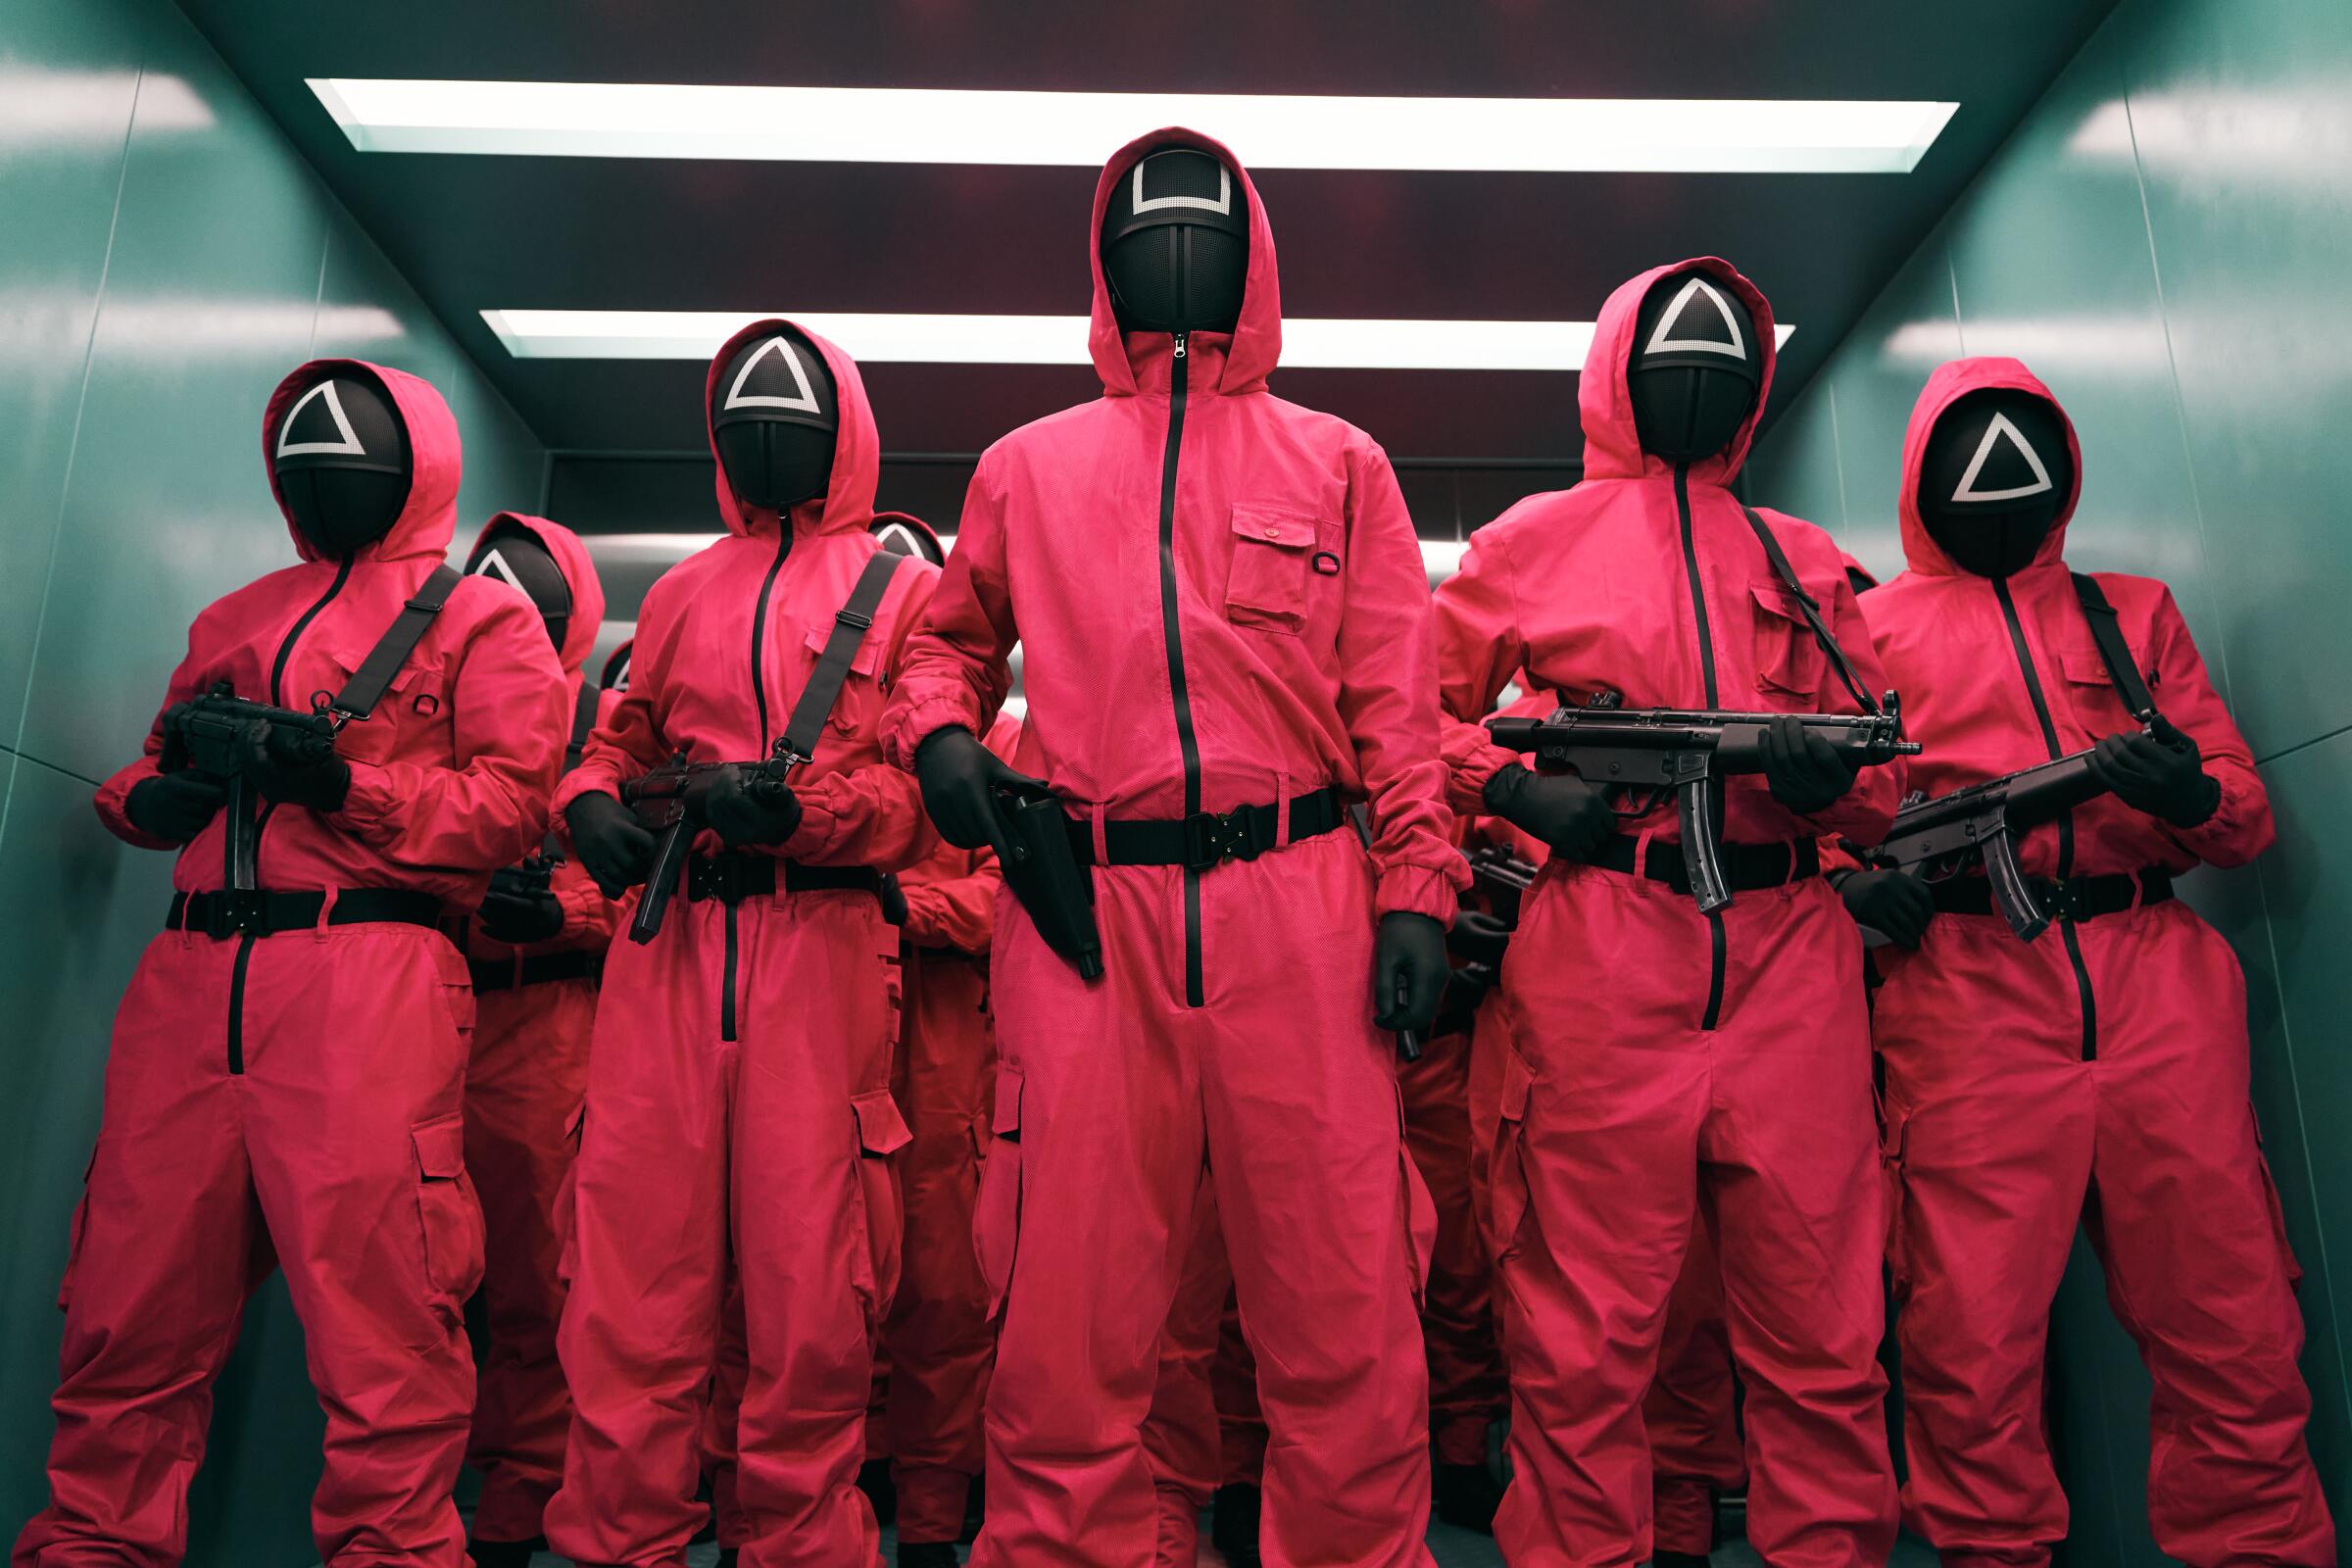 An image of the pink jumpsuit-wearing guards of "Squid Game."